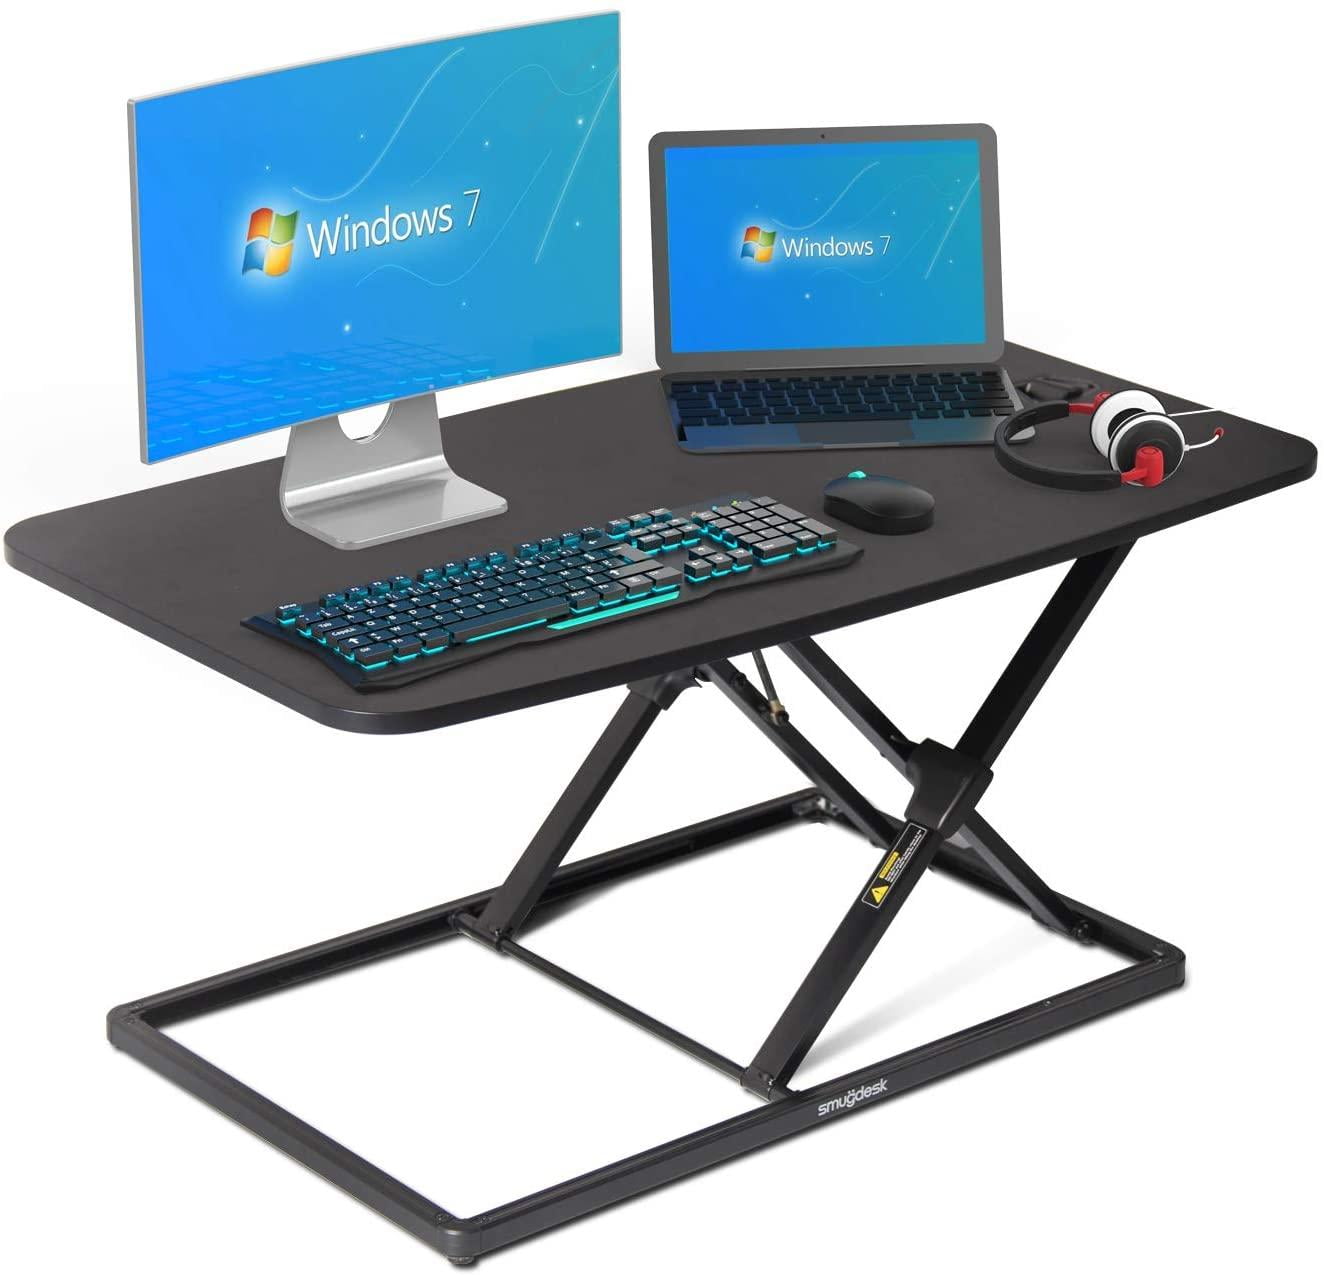 GCP Products Standing Desk Converter - 32 Inch Adjustable Sit To